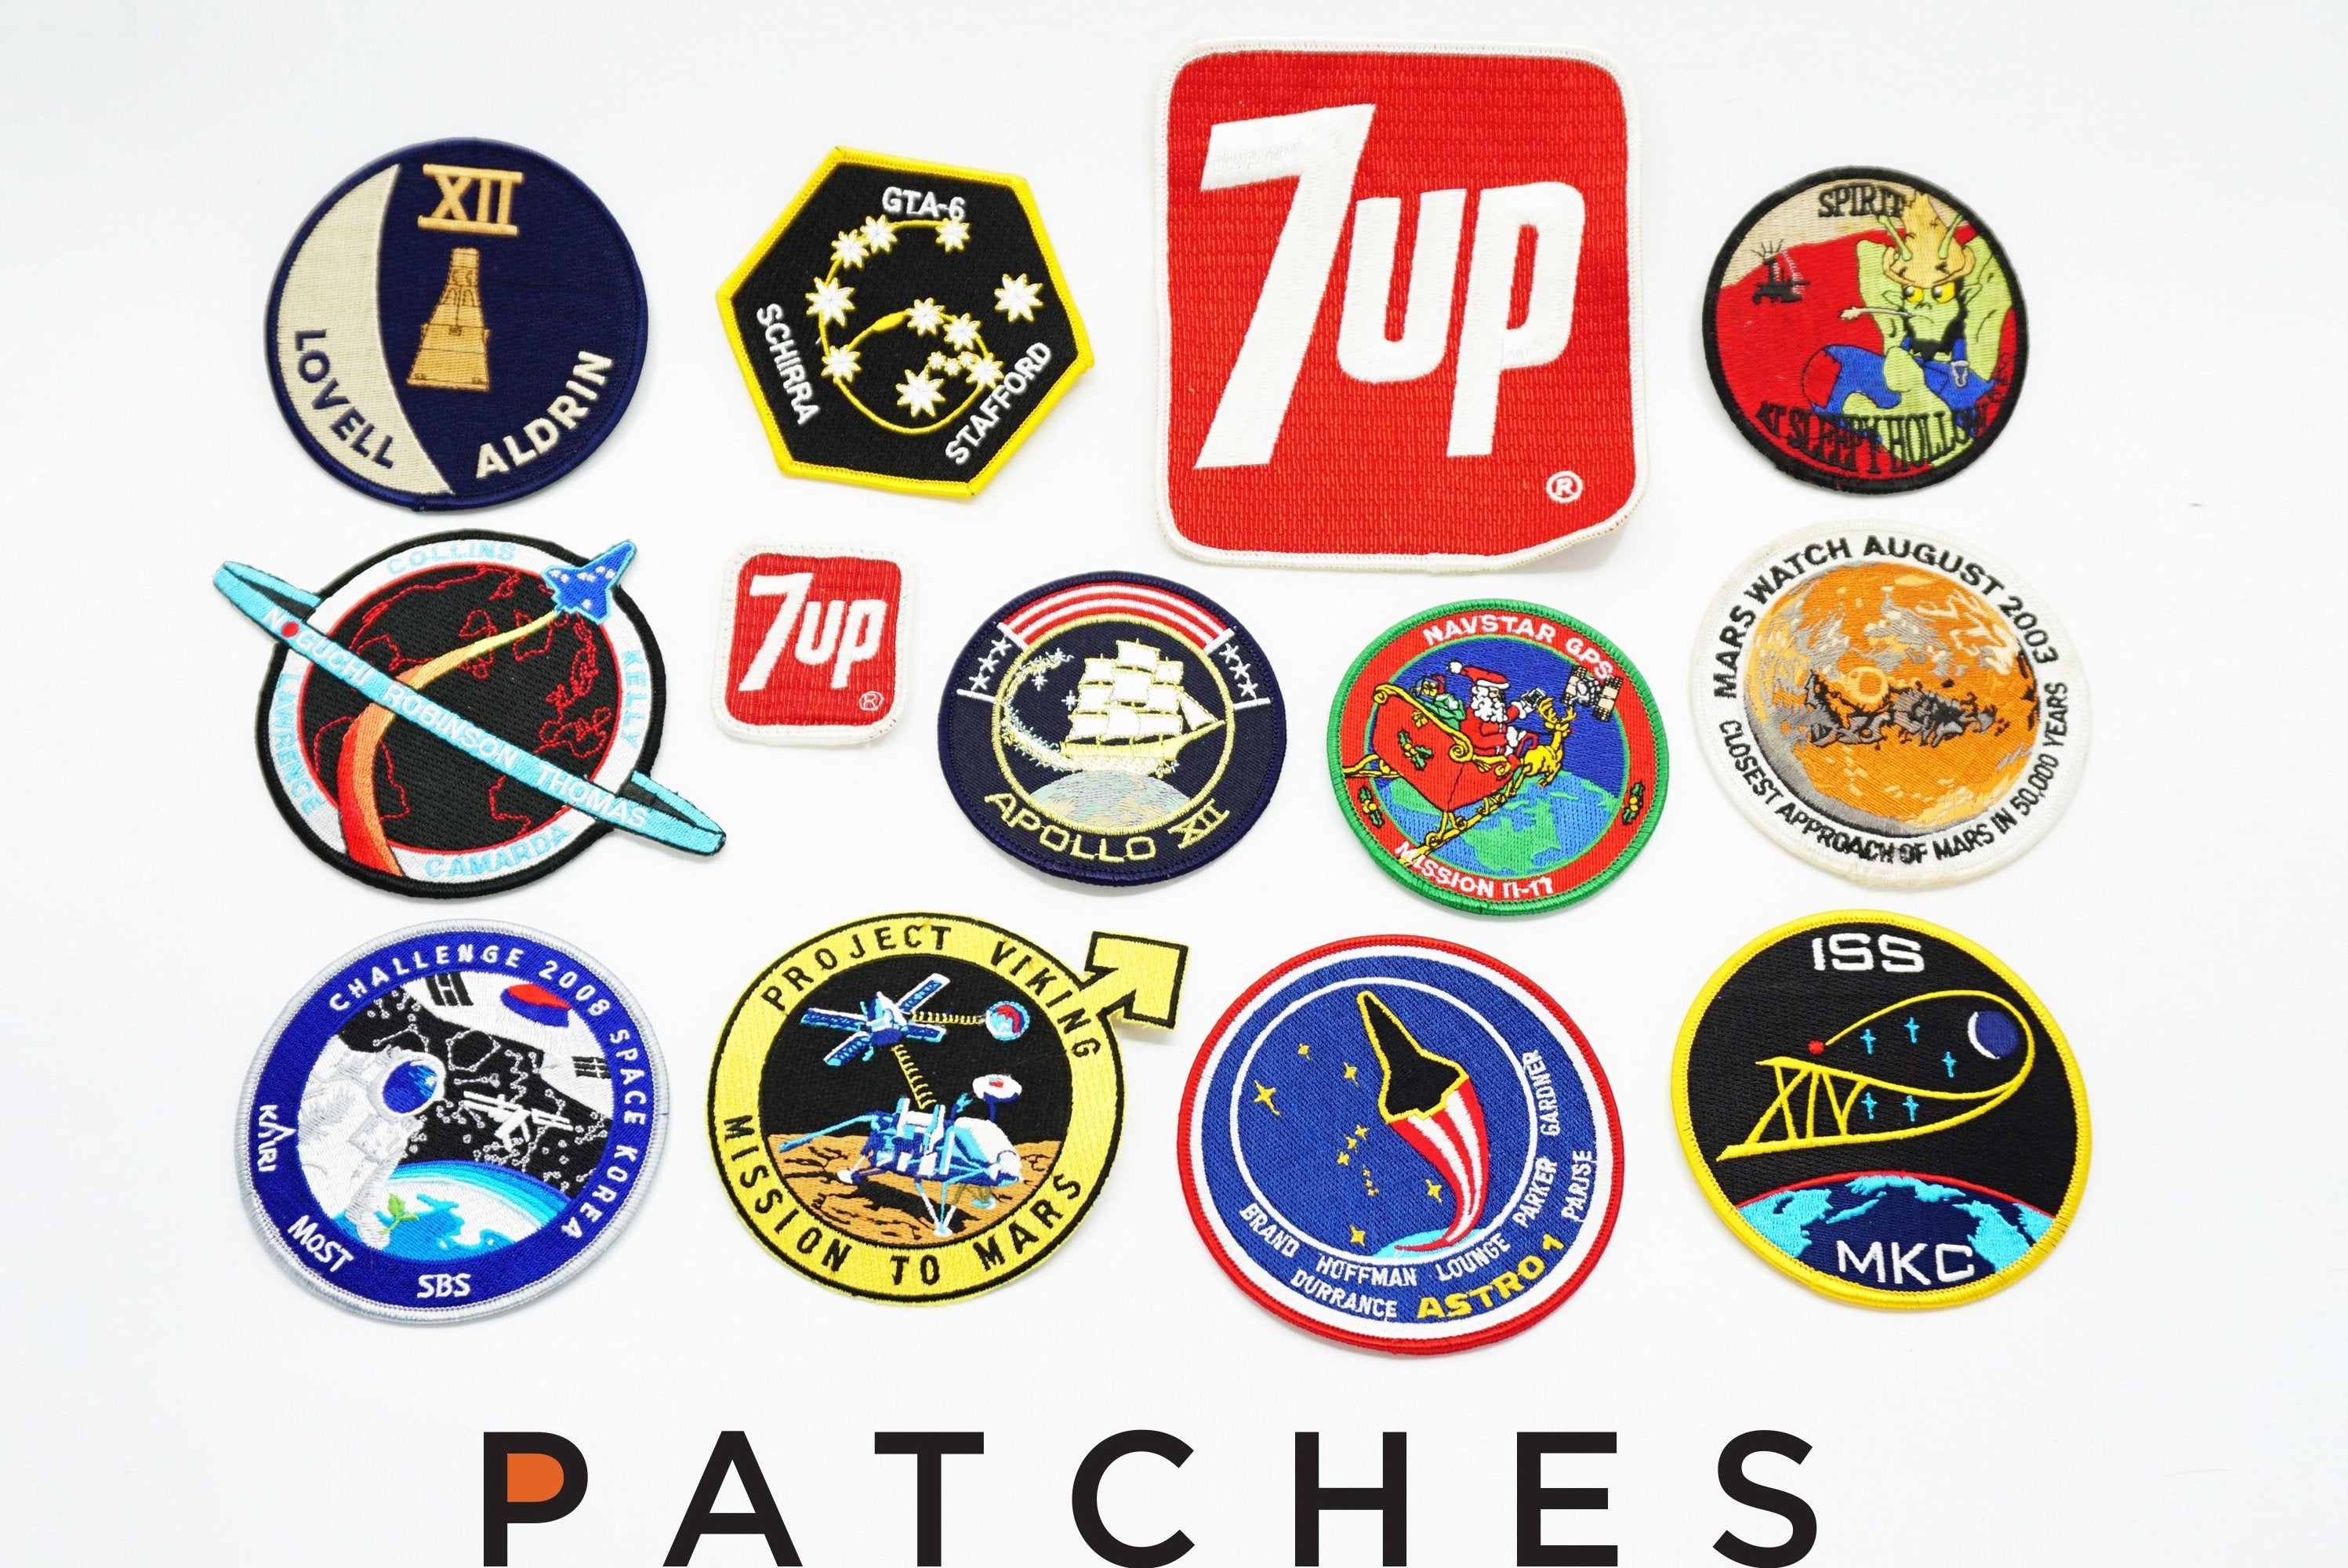 80's Party Patch – Basics Clothing Store